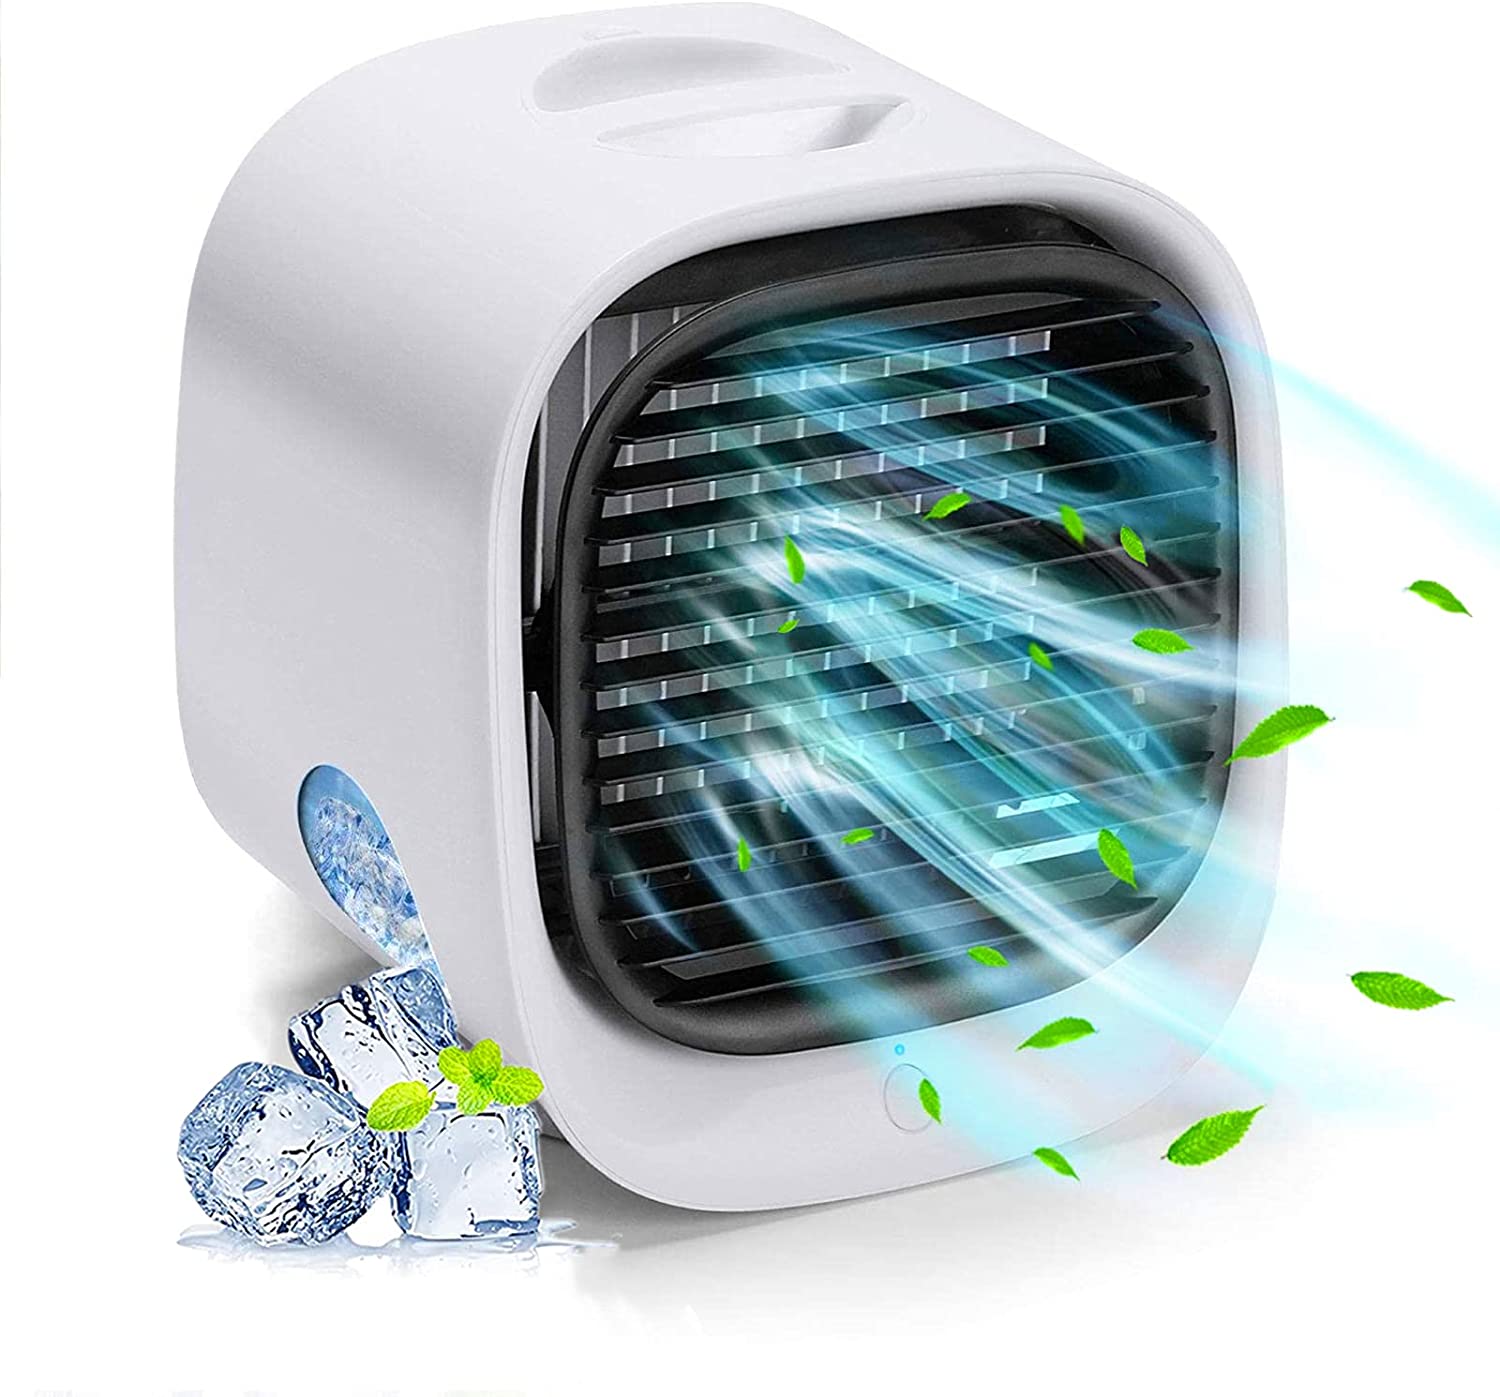 (NET)Portable Air Cooler Conditioner Usb Rechargable Humidifier Purifier Room Cooling 3 Adjustable Speeds